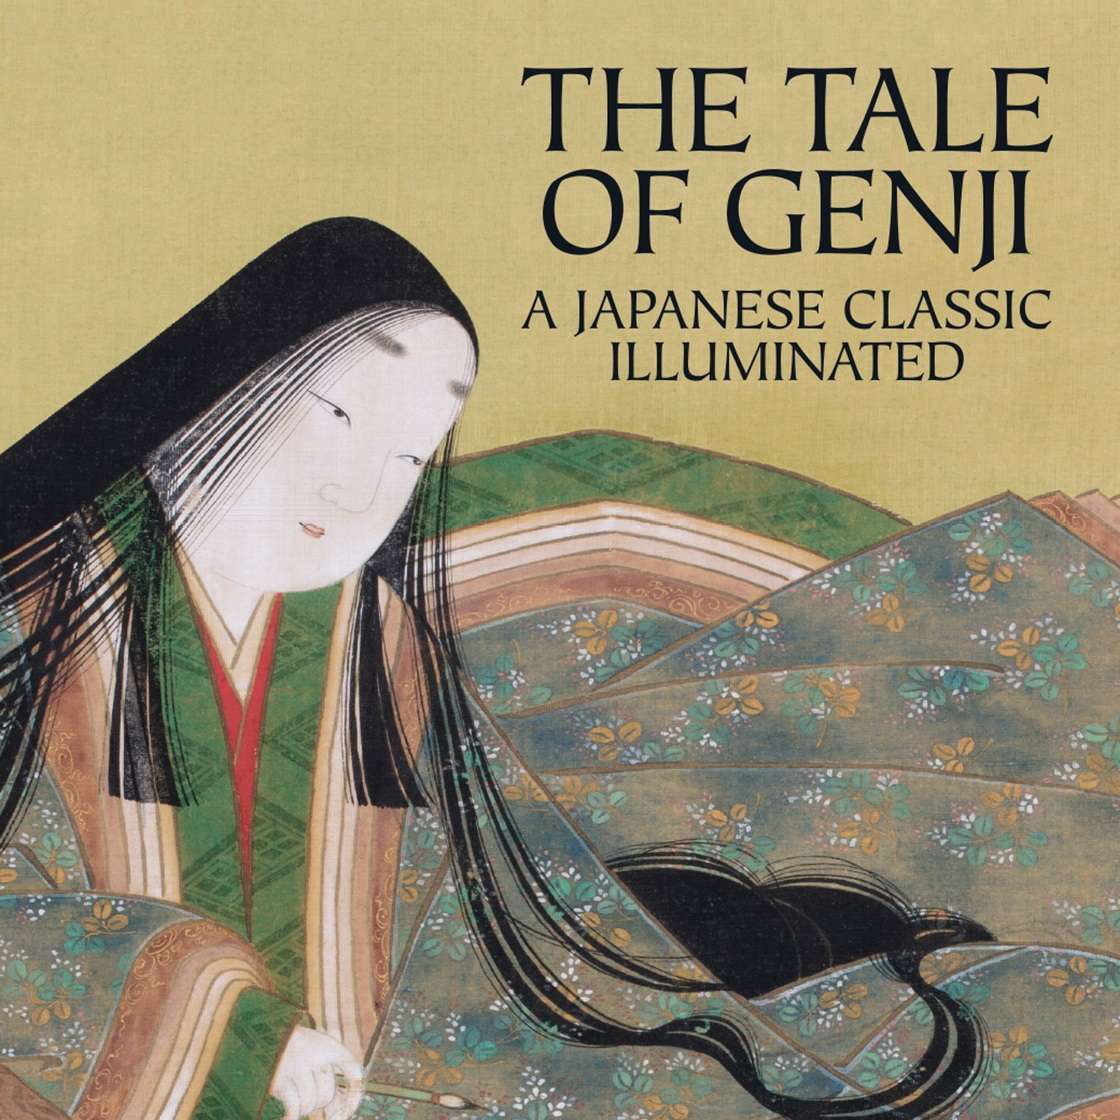 THE TALE OF GENJI puzzle online from photo